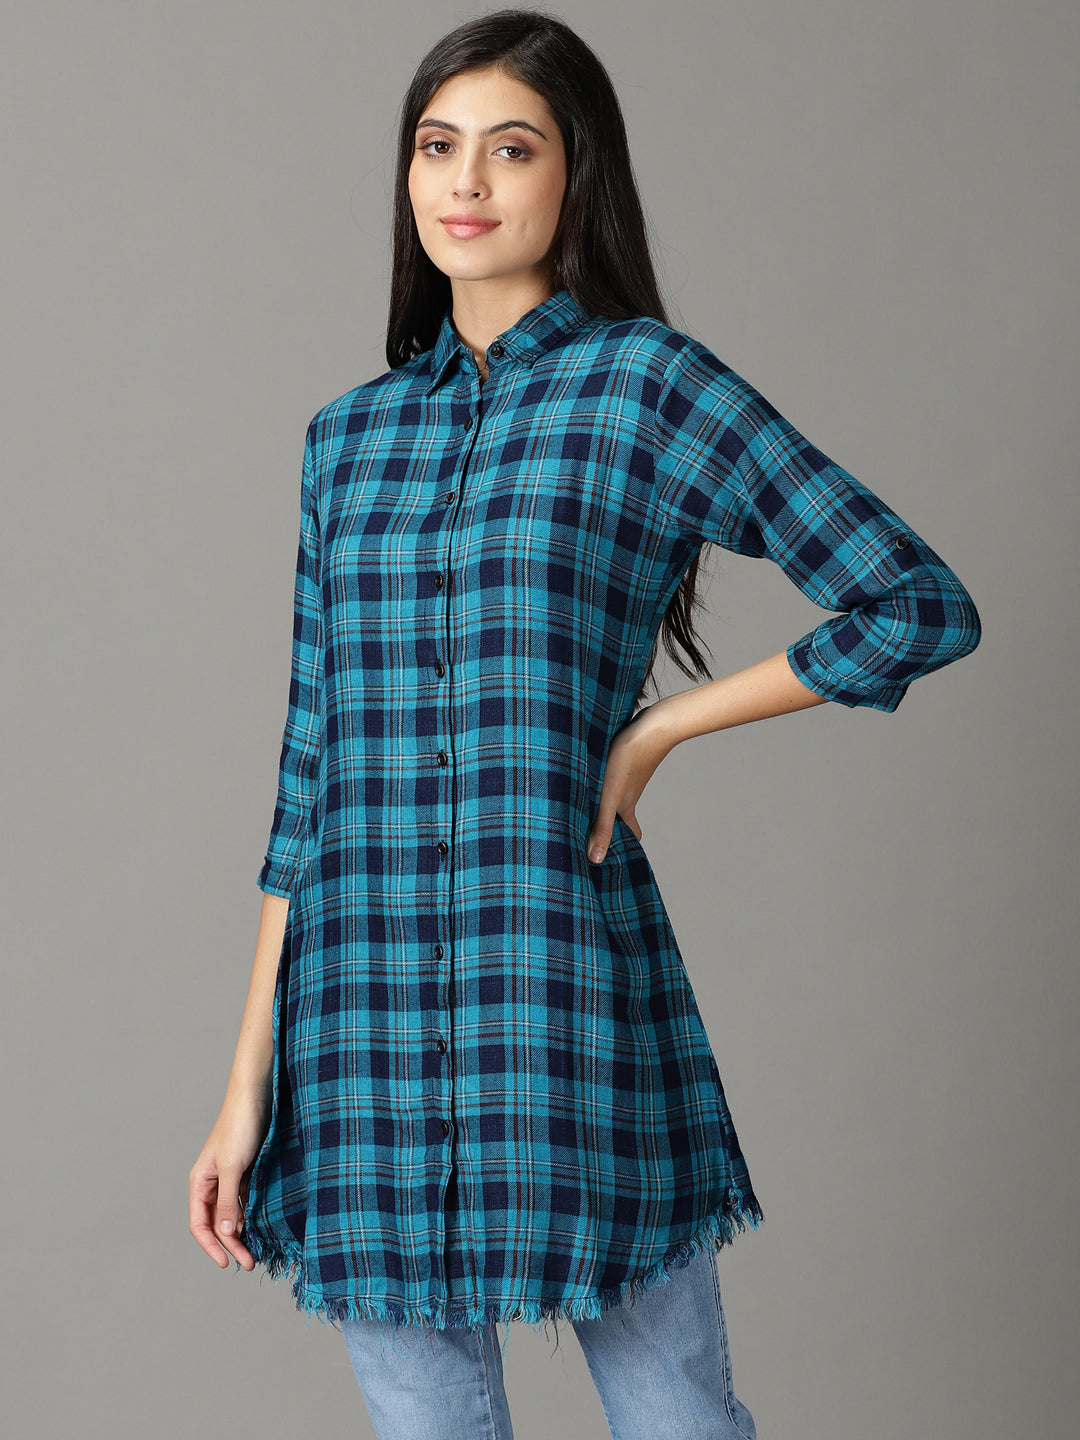 Women's Teal Checked Shirt